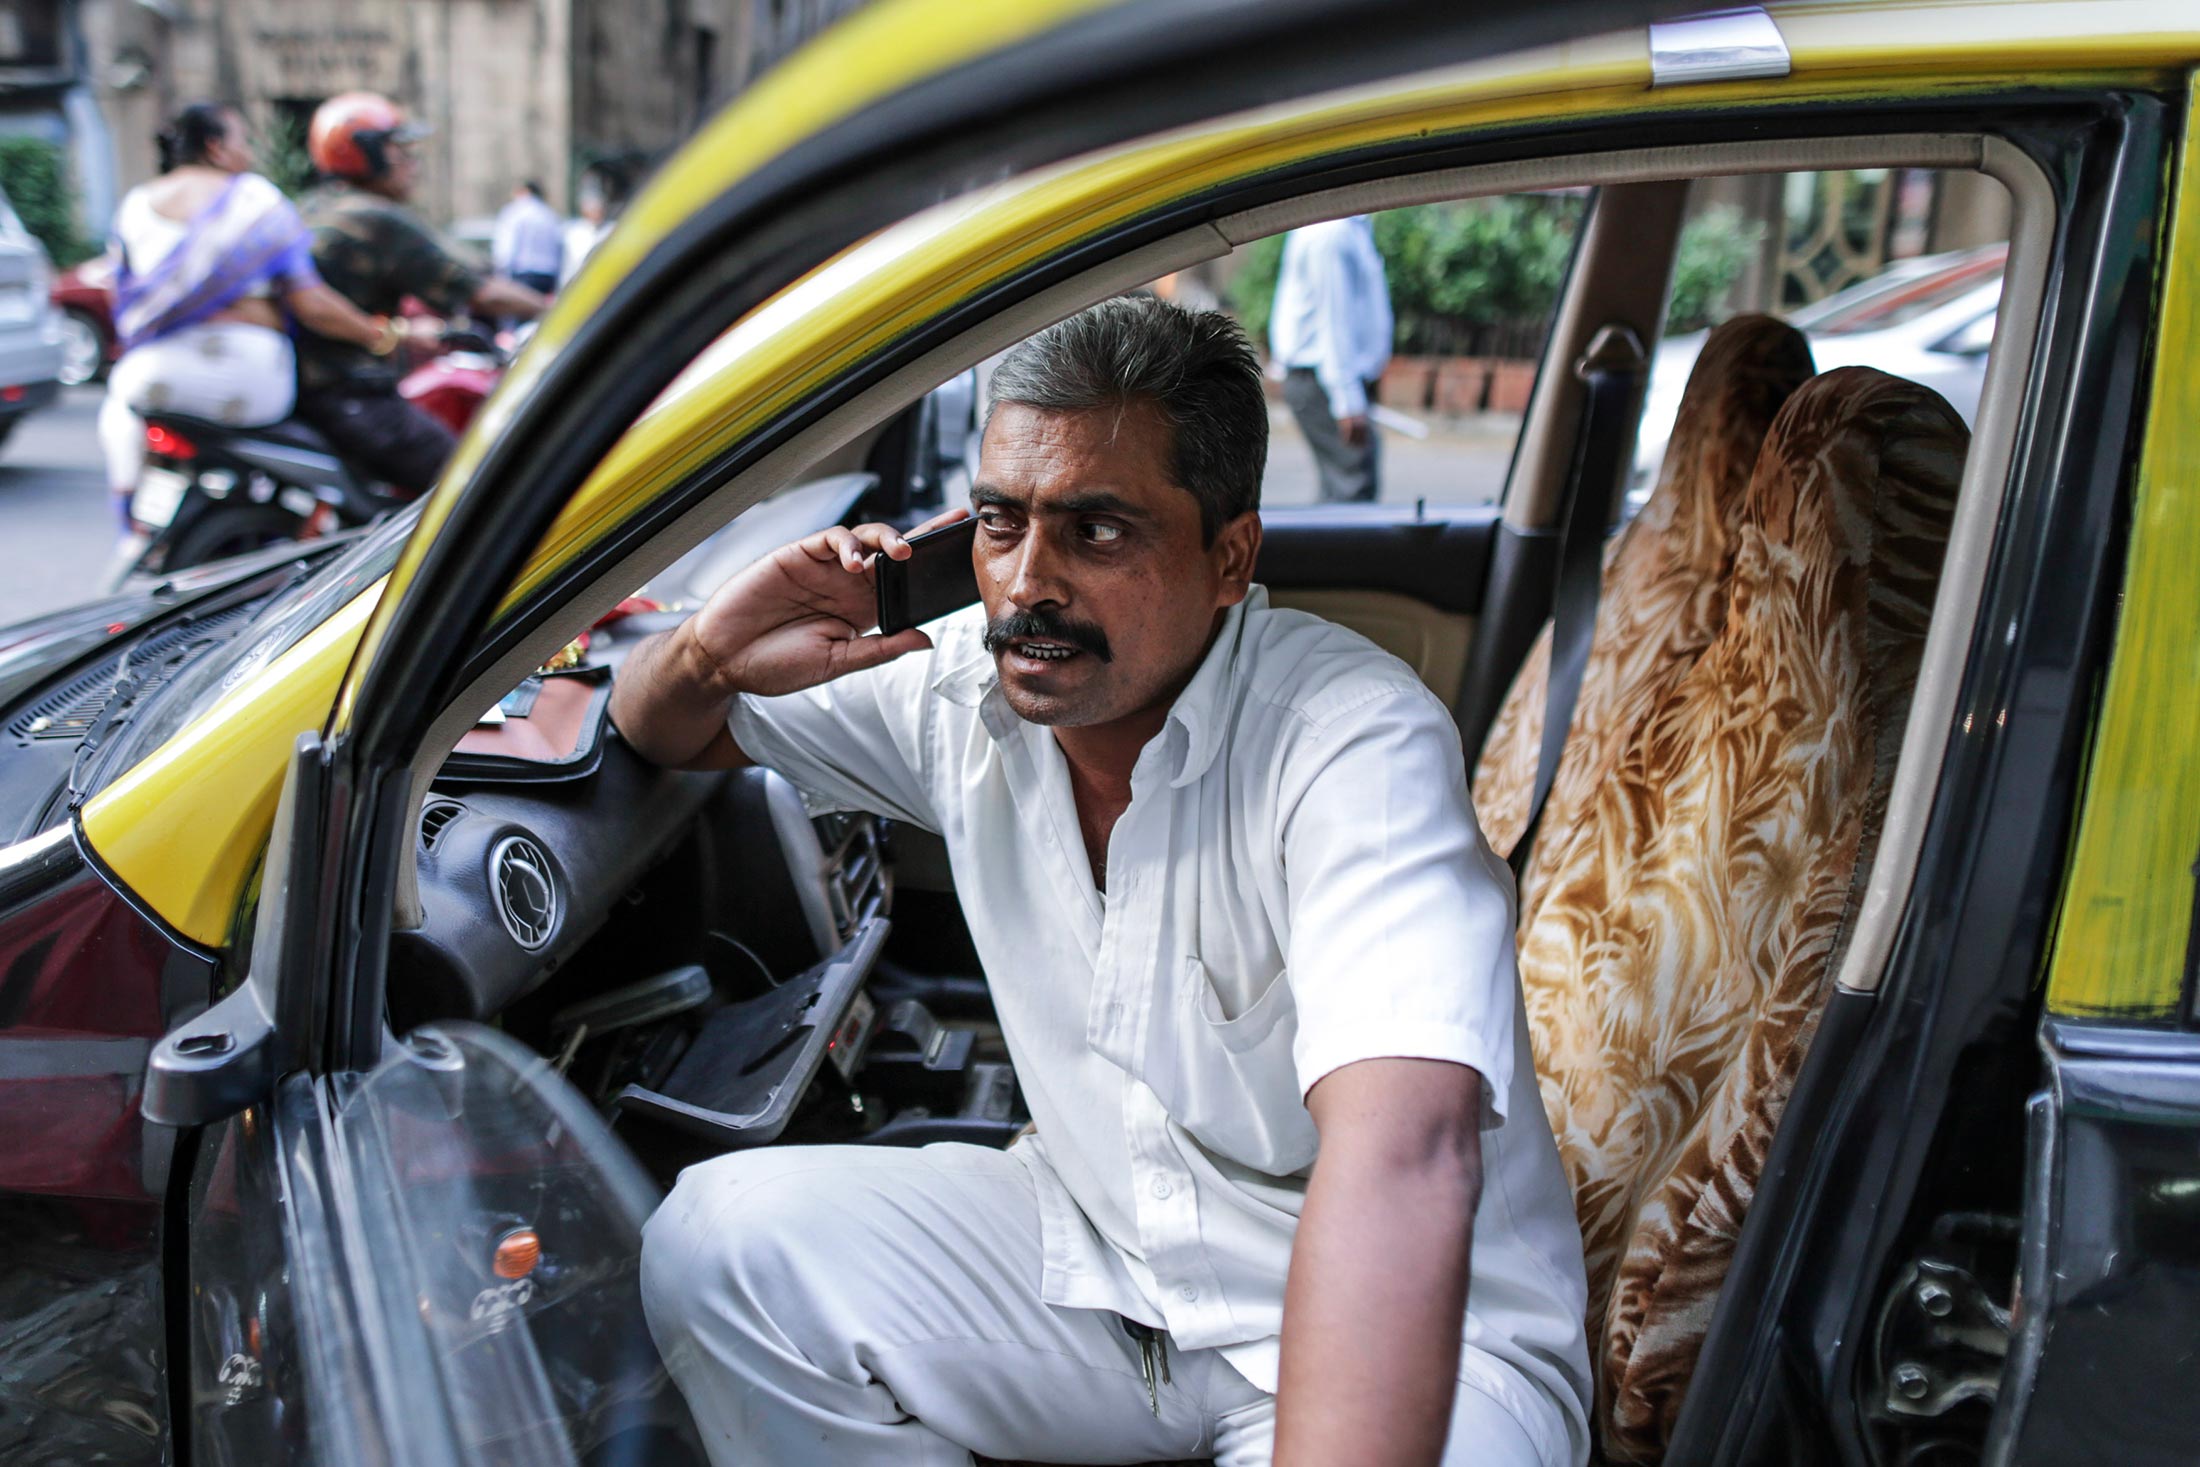 A taxi driver talks on mobile phone as sits inside his taxi in Mumbai, India, on Oct. 19.
